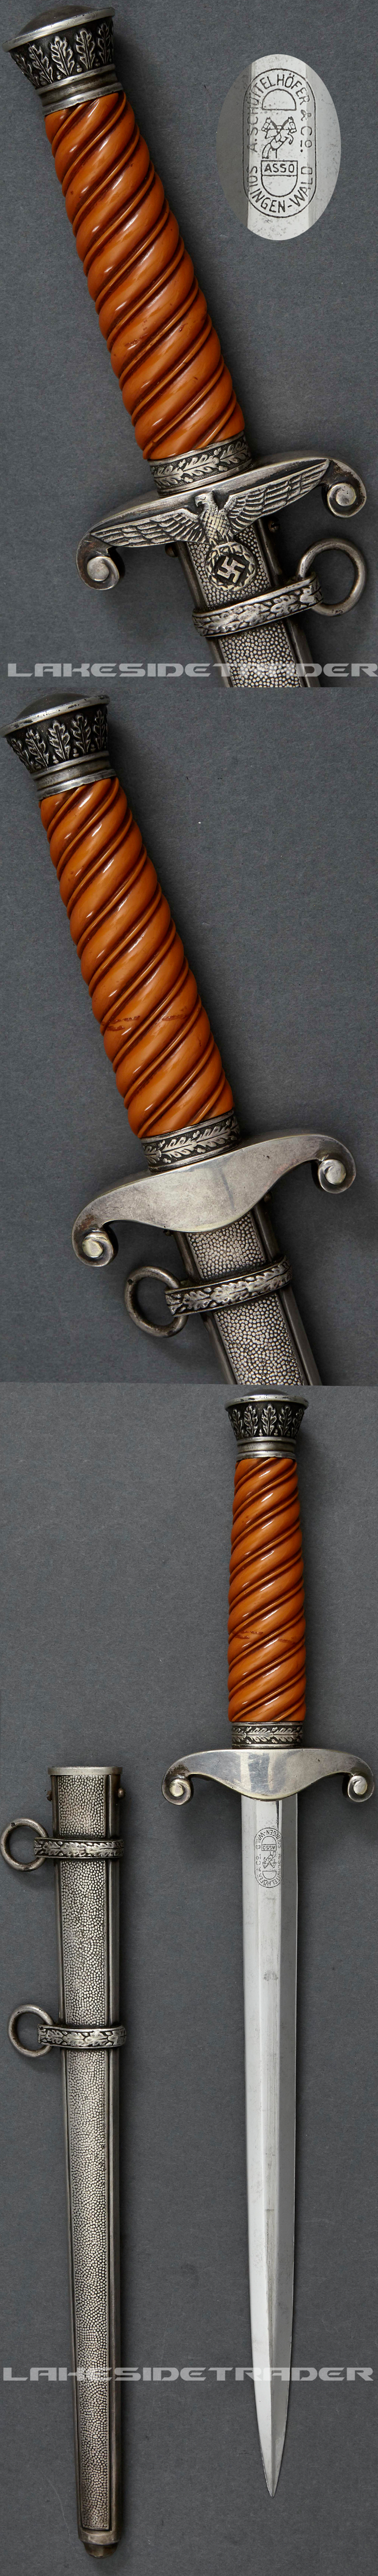 Very Rare & Historical Presentation Army Dagger to Blood Order Recipient   